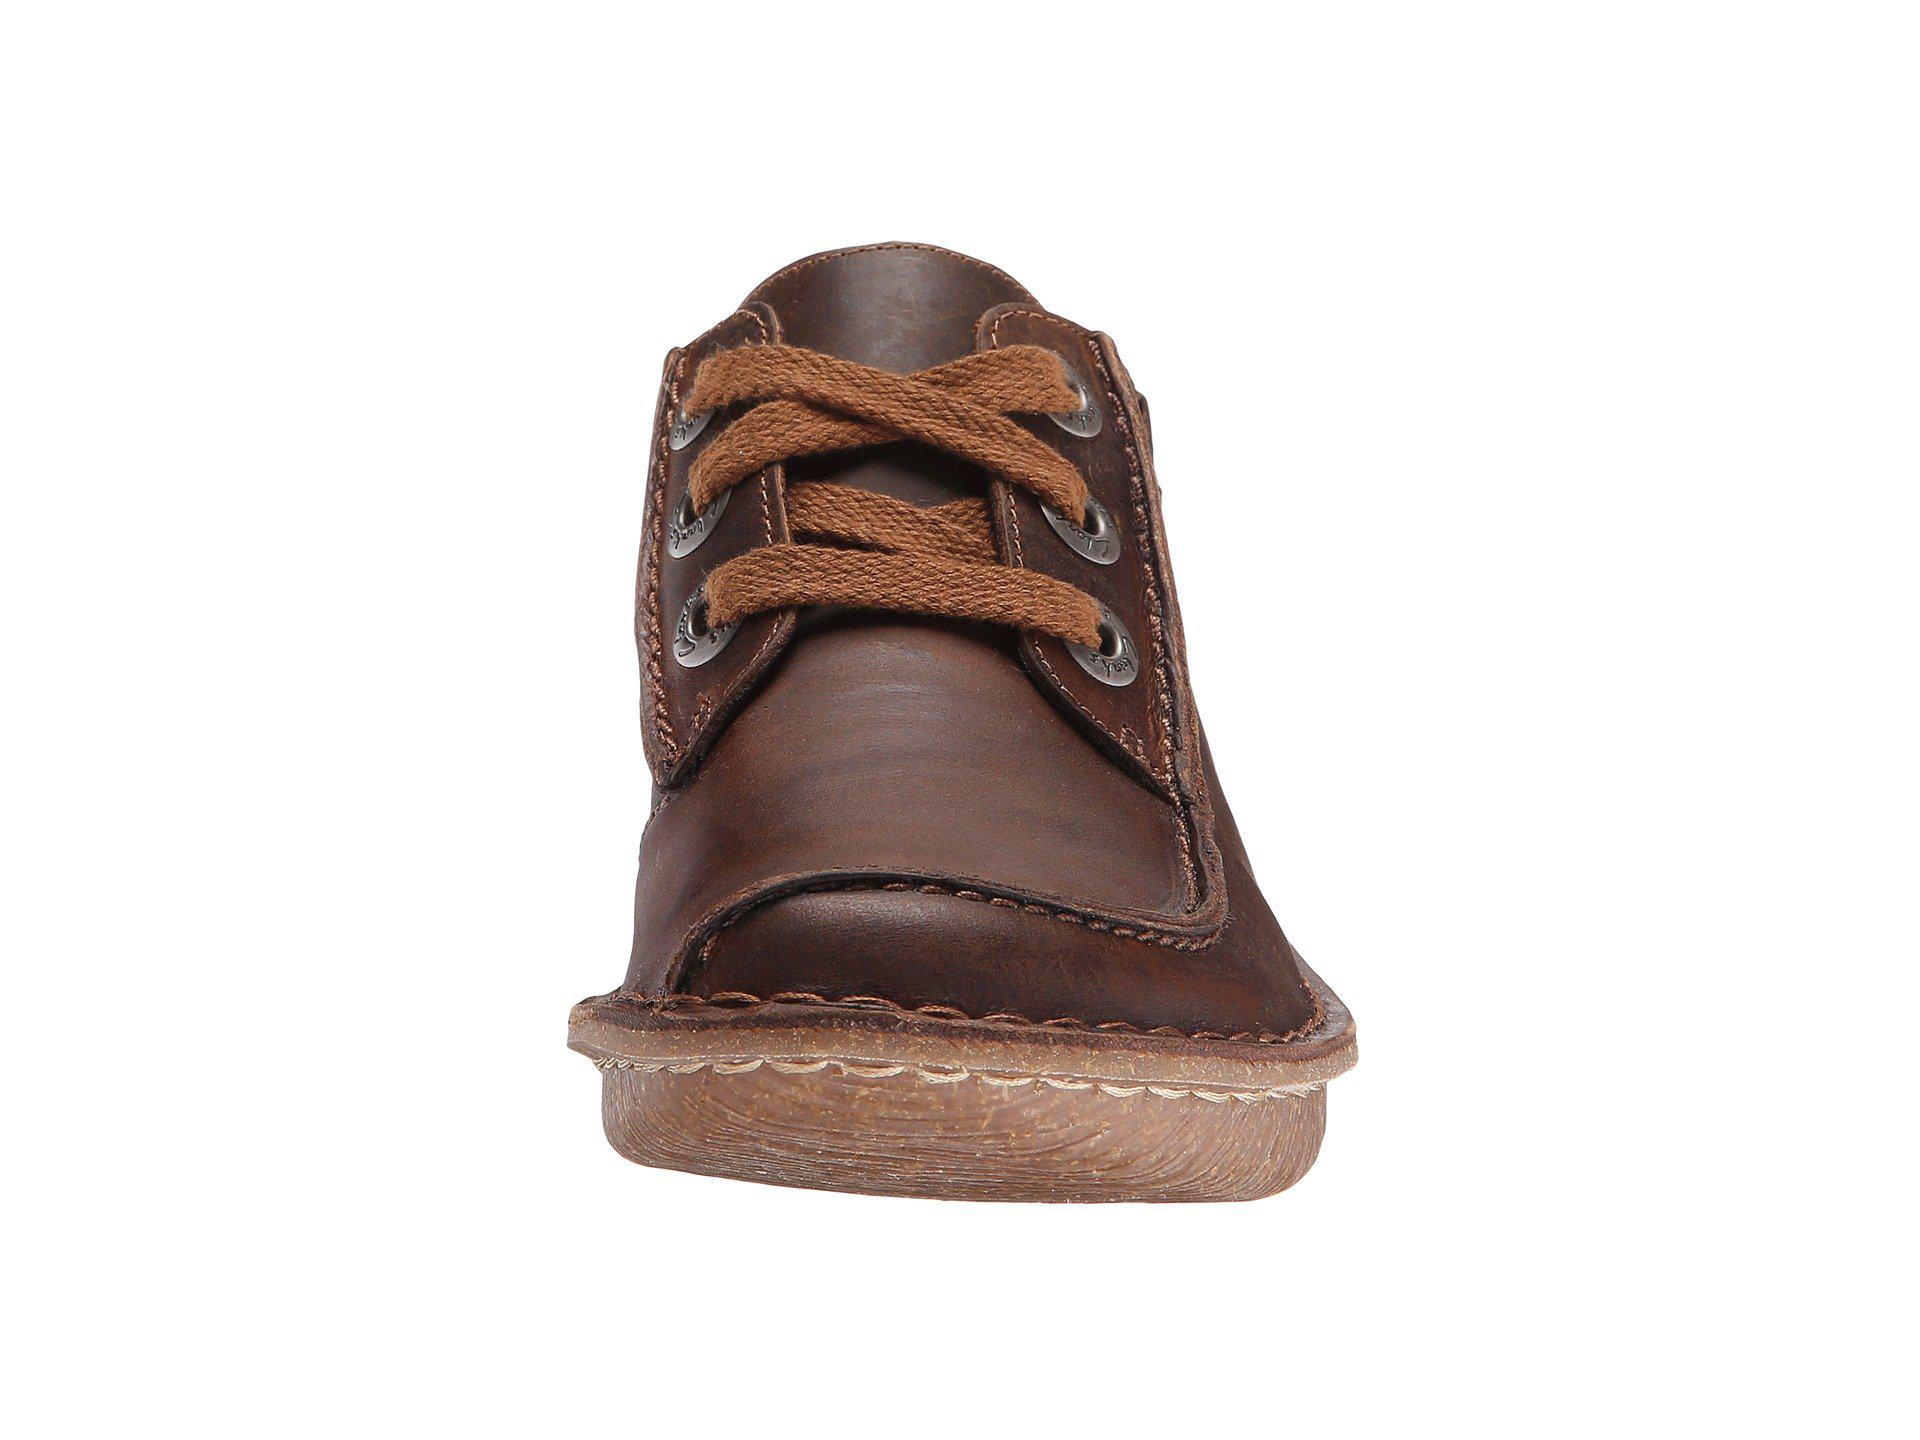 Clarks Funny Dream Brown Flash Sales, SAVE 54%.